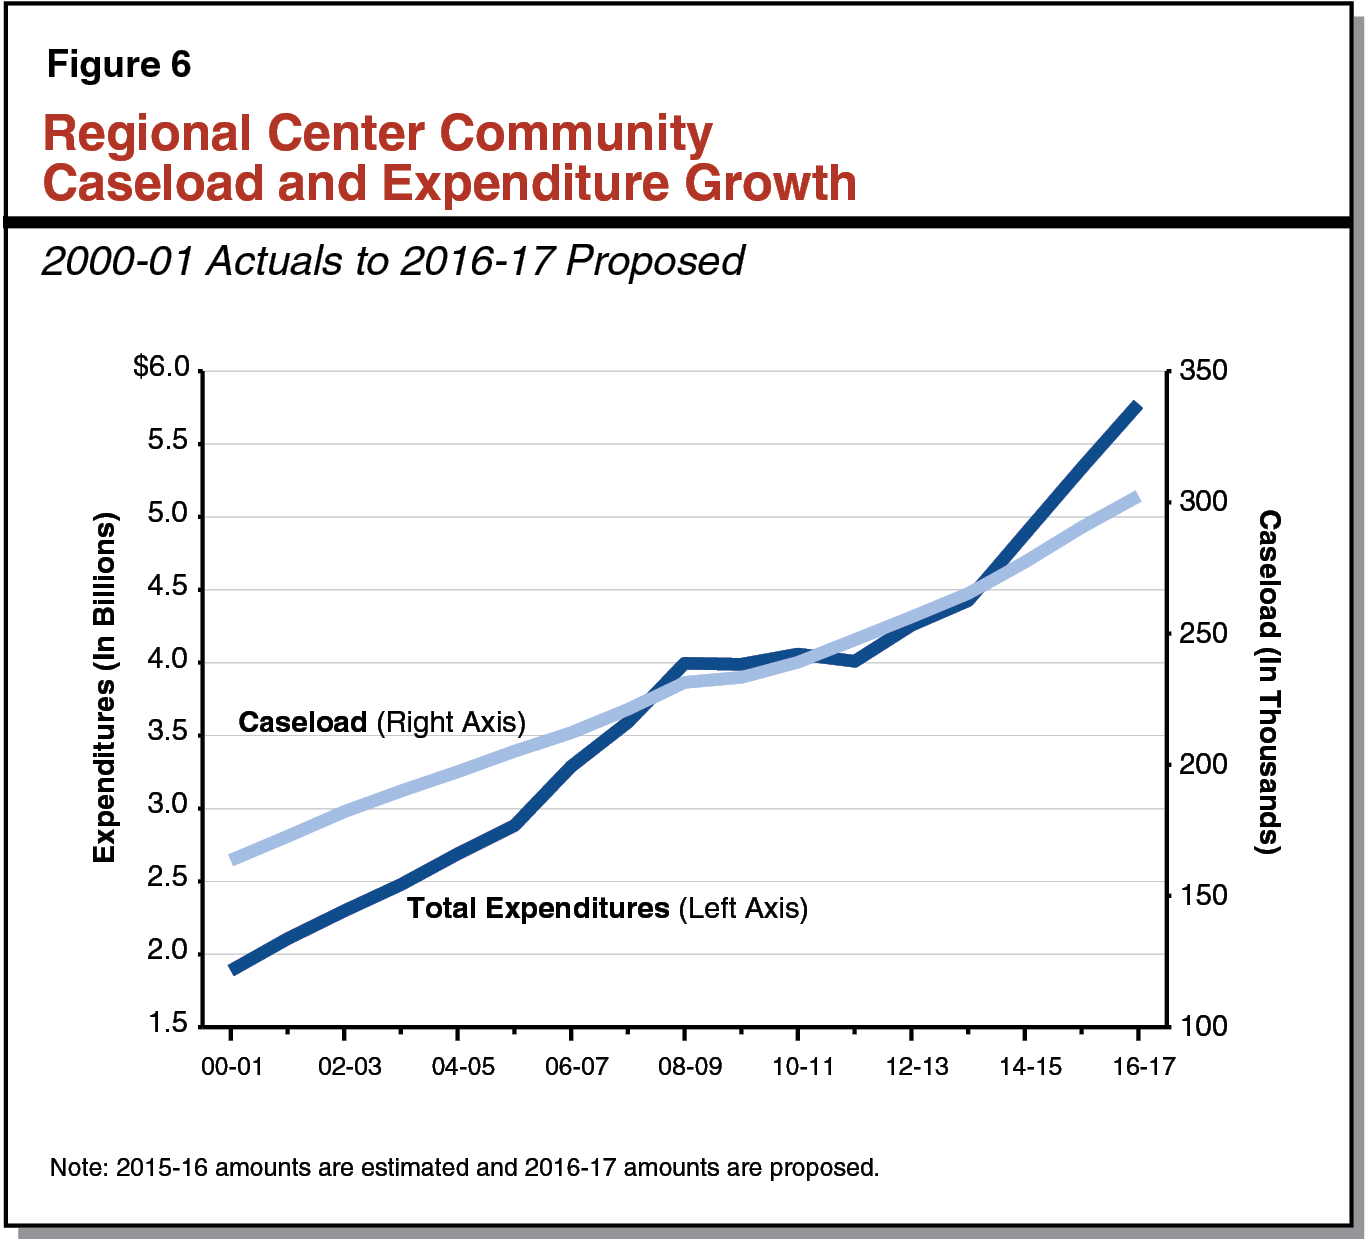 Figure 6 - Regional Center Community Caseload and Expenditure Growth